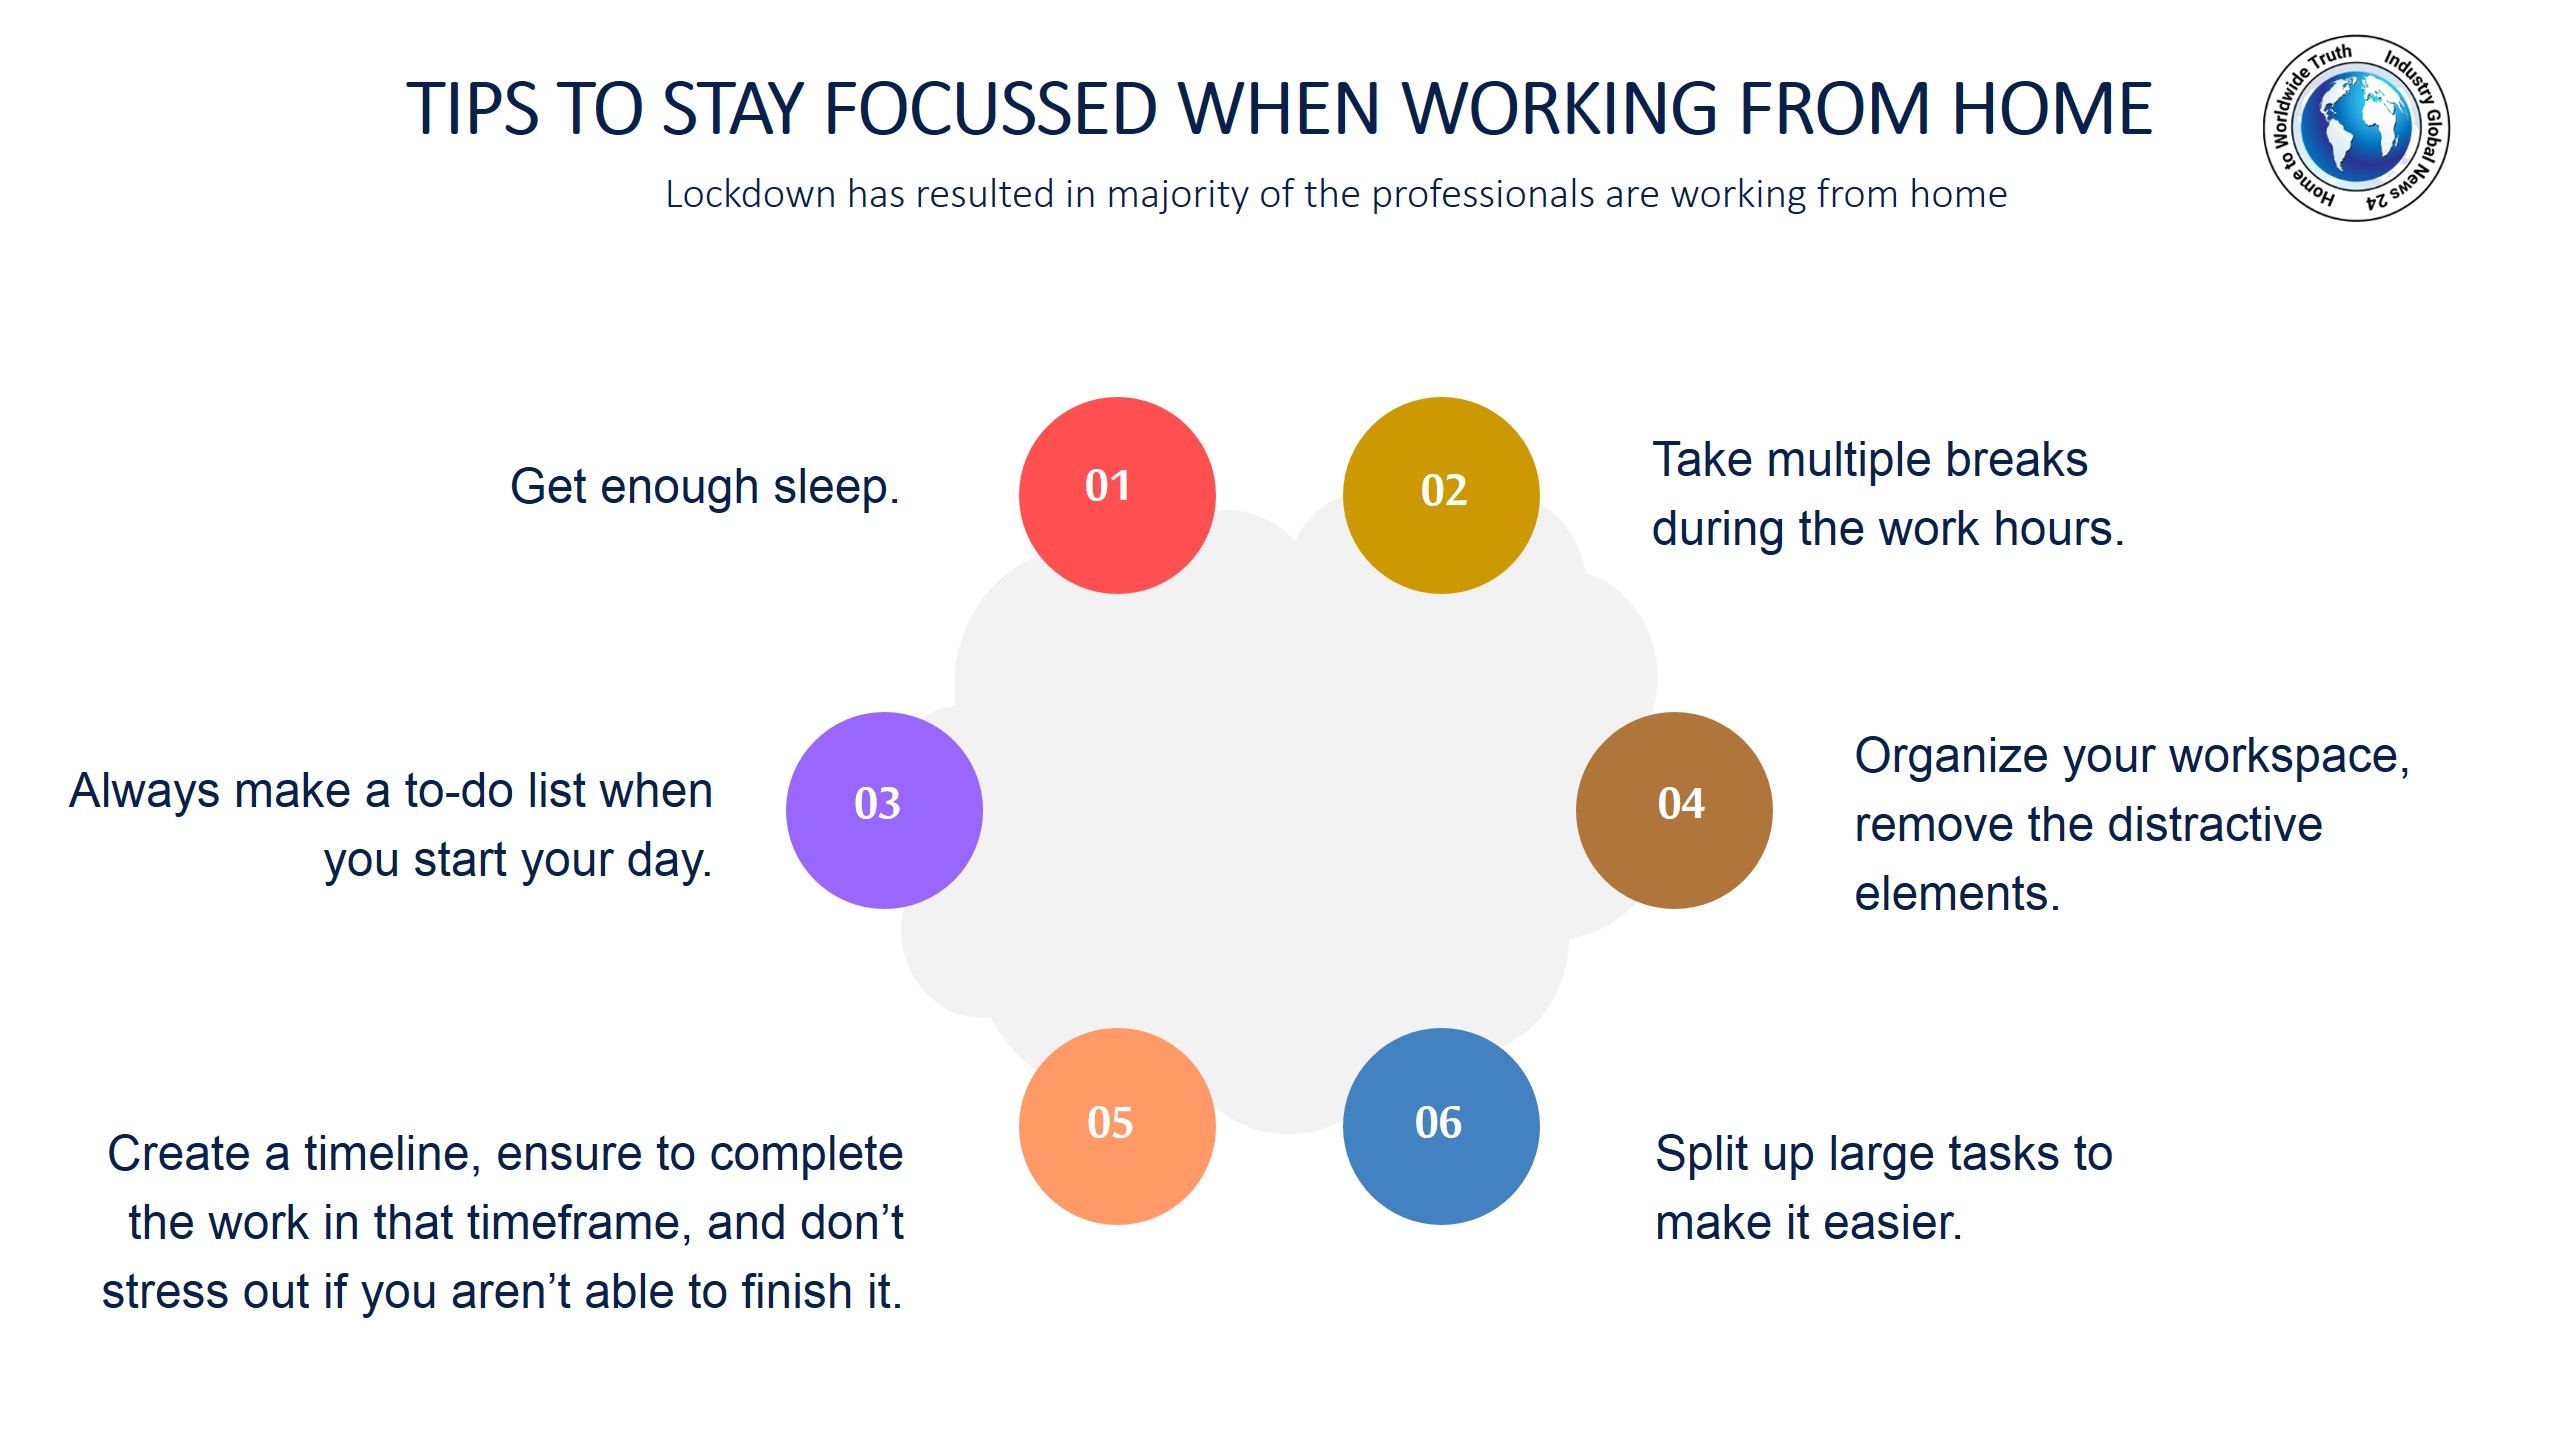 Tips to stay focussed when working from home